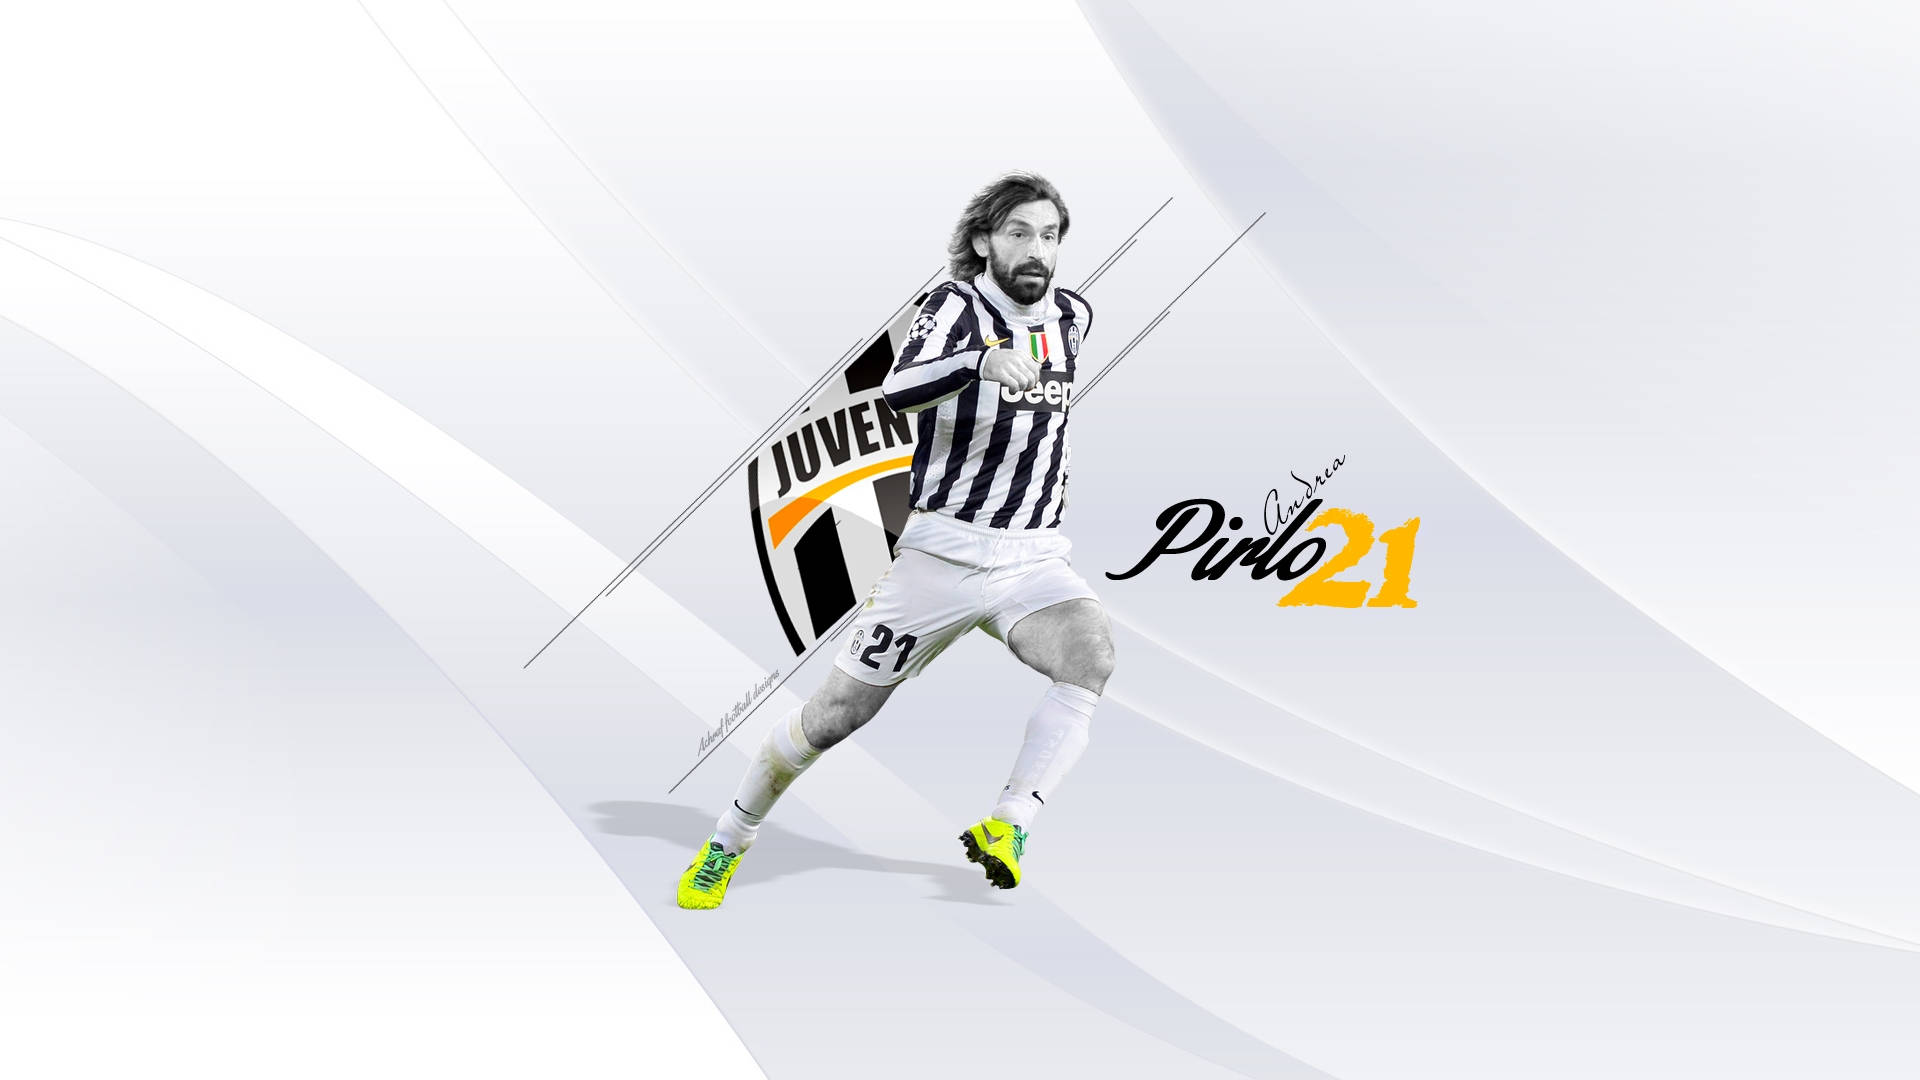 Iconic Footballer Andrea Pirlo Against A White Background